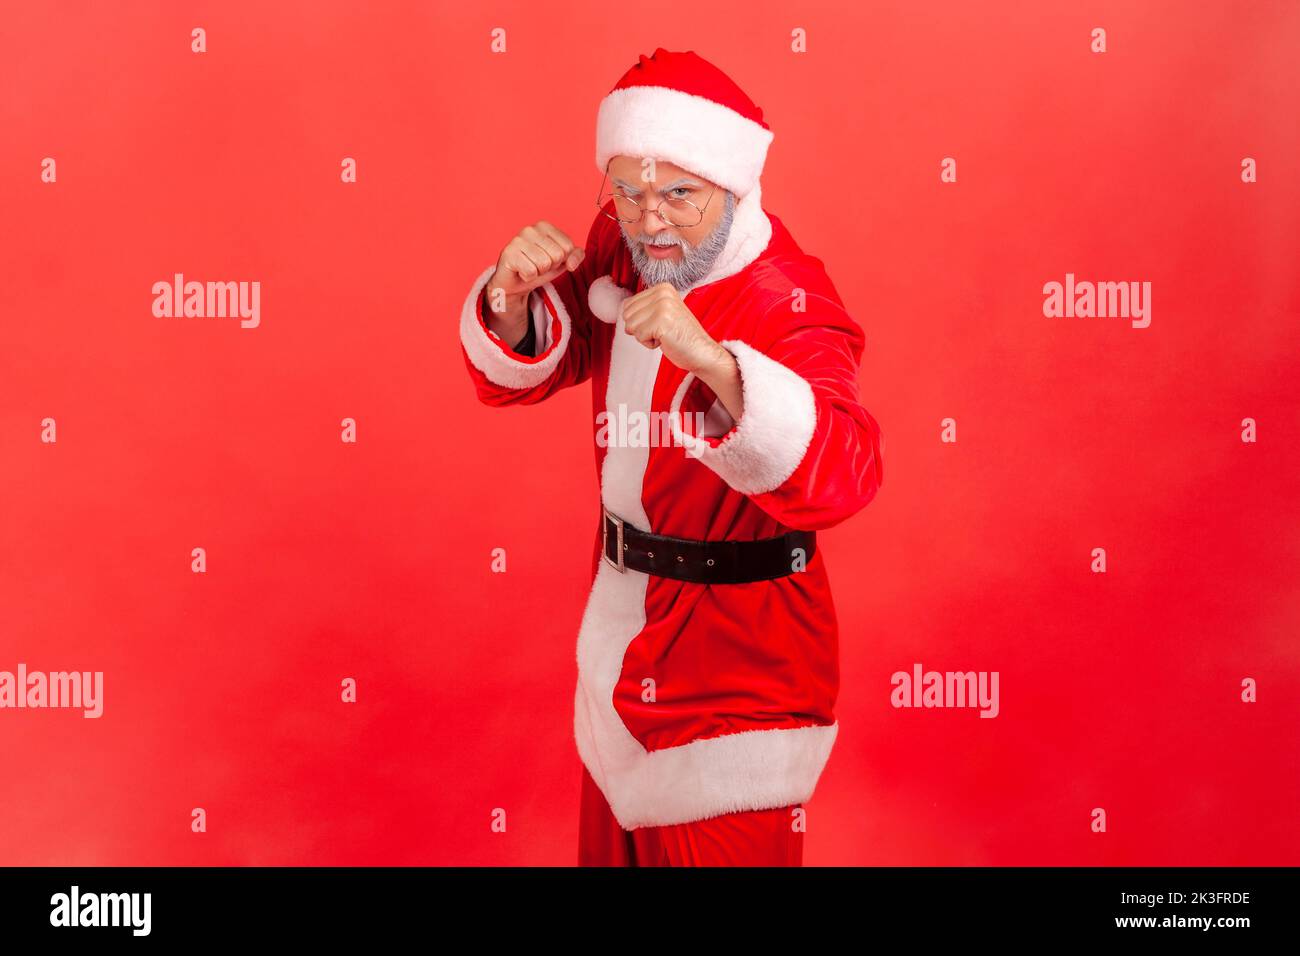 Strict elderly man with gray beard wearing santa claus costume standing with fists and being ready to fight, looking at camera with angry expression. Indoor studio shot isolated on red background. Stock Photo